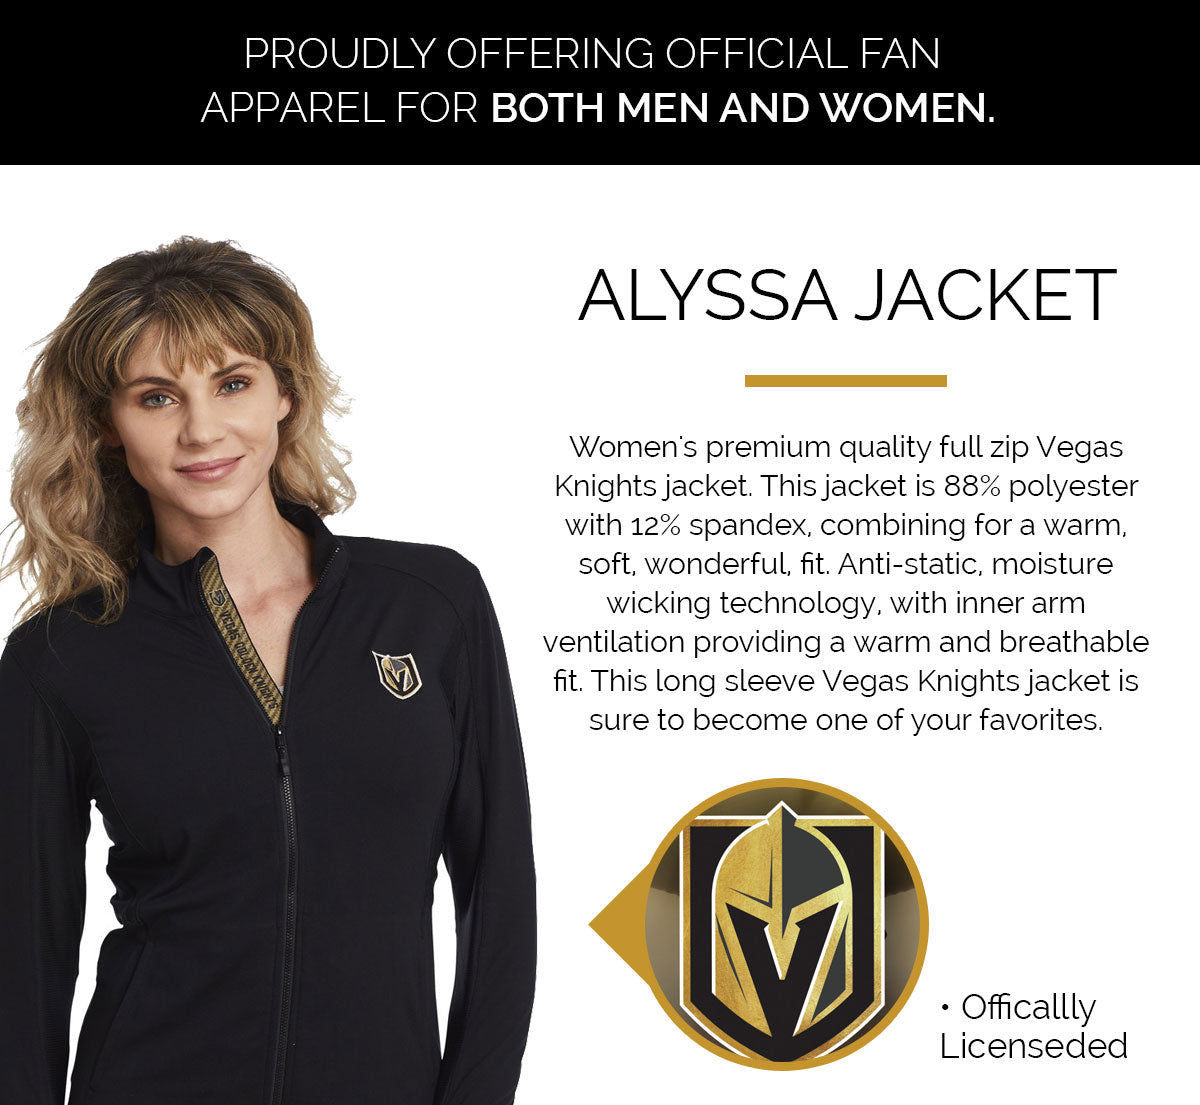 Women's premium quality full zip Vegas Knights jacket. This jacket is 88% polyester with 12% spandex, combining for a warm, soft, wonderful, fit. Anti-static, moisture wicking technology, with inner arm ventilation providing a warm and breathable fit. This long sleeve Vegas Knights jacket is sure to become one of your favorites.